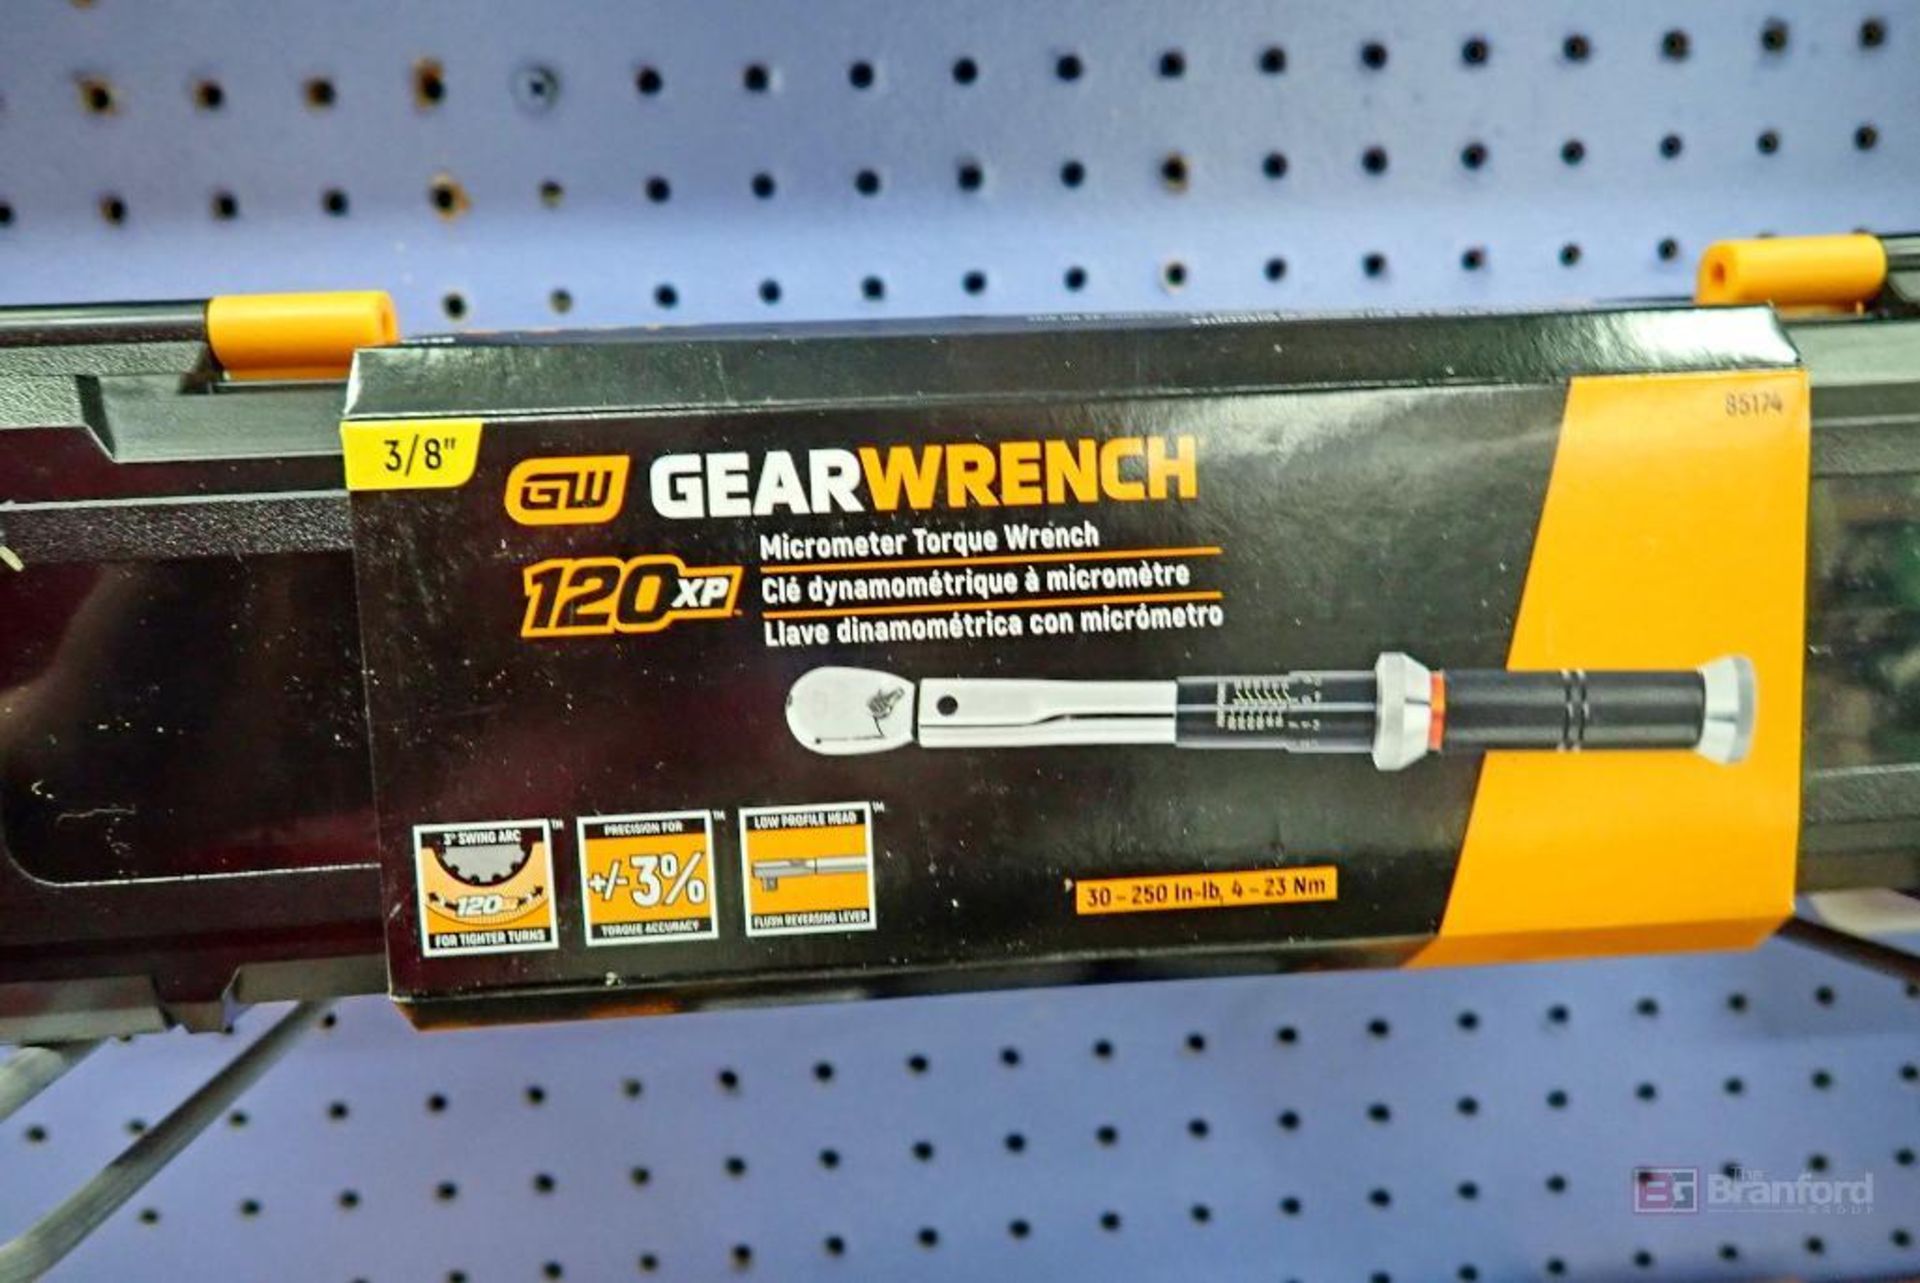 GearWrench 85174 120XP Micrometer Torque Wrench - Image 3 of 5